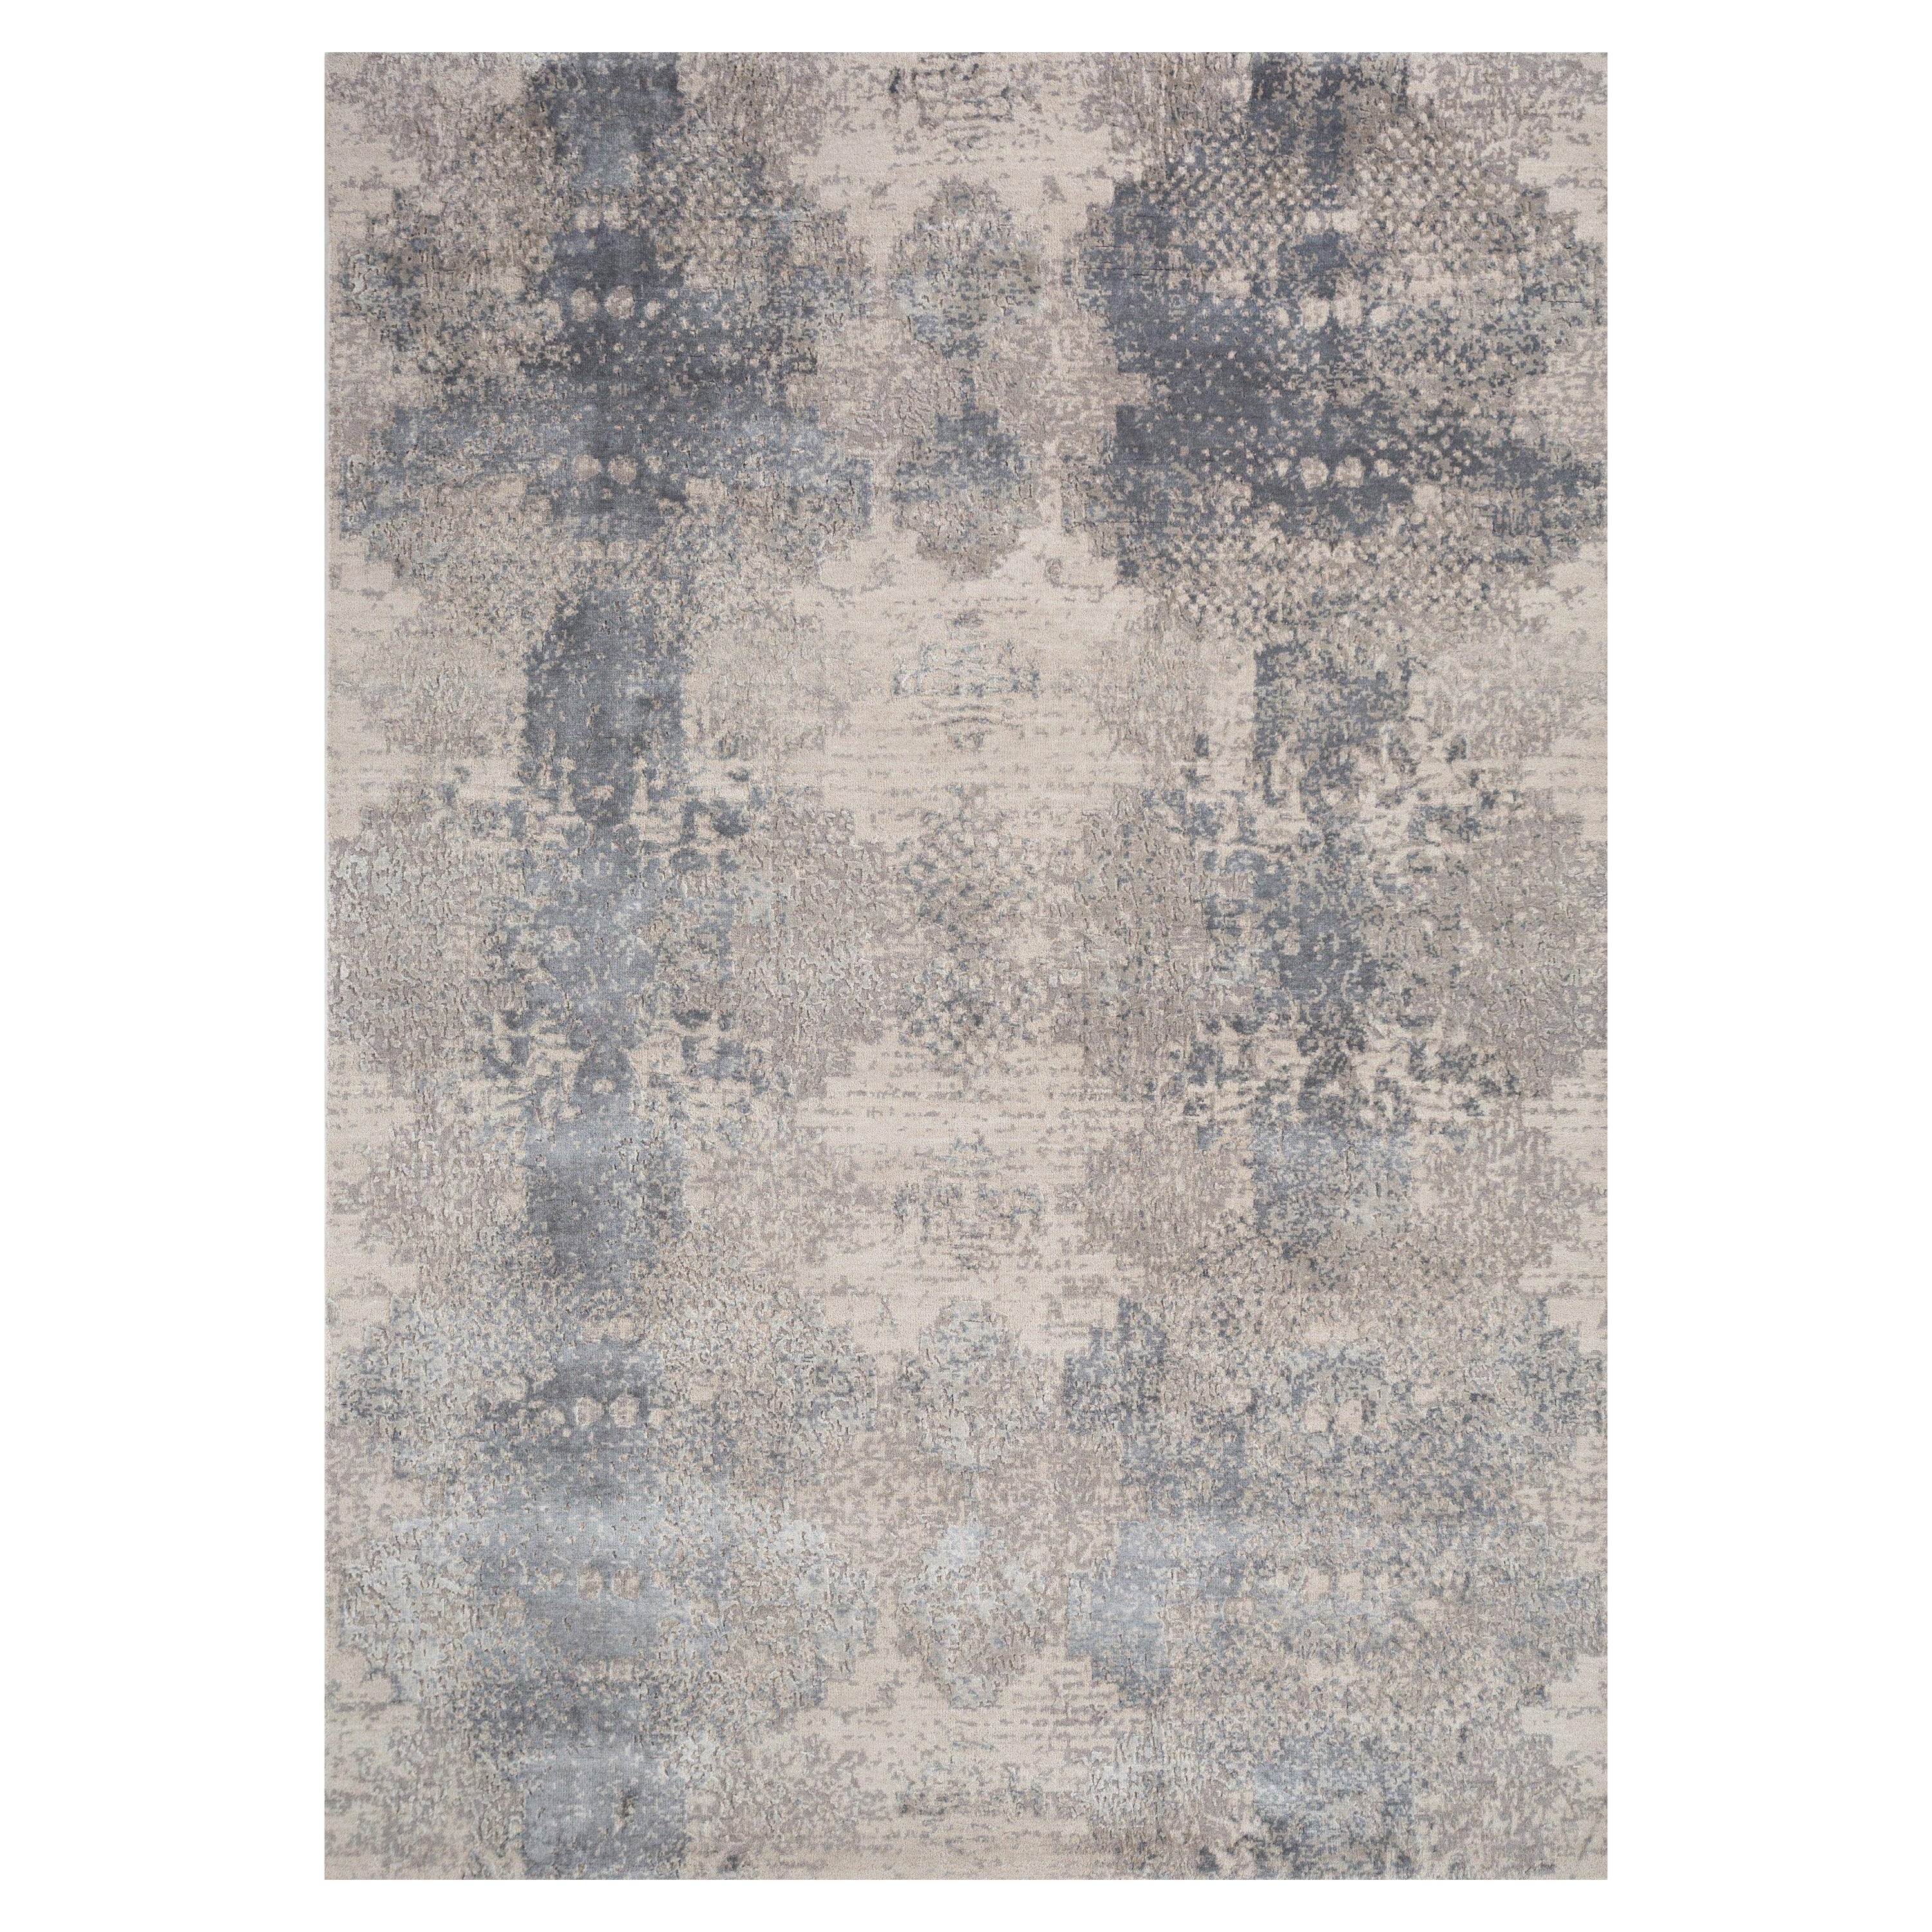 Serendipity Weave Antique White & Soft Gray 180x270 cm Handknotted Rug For Sale